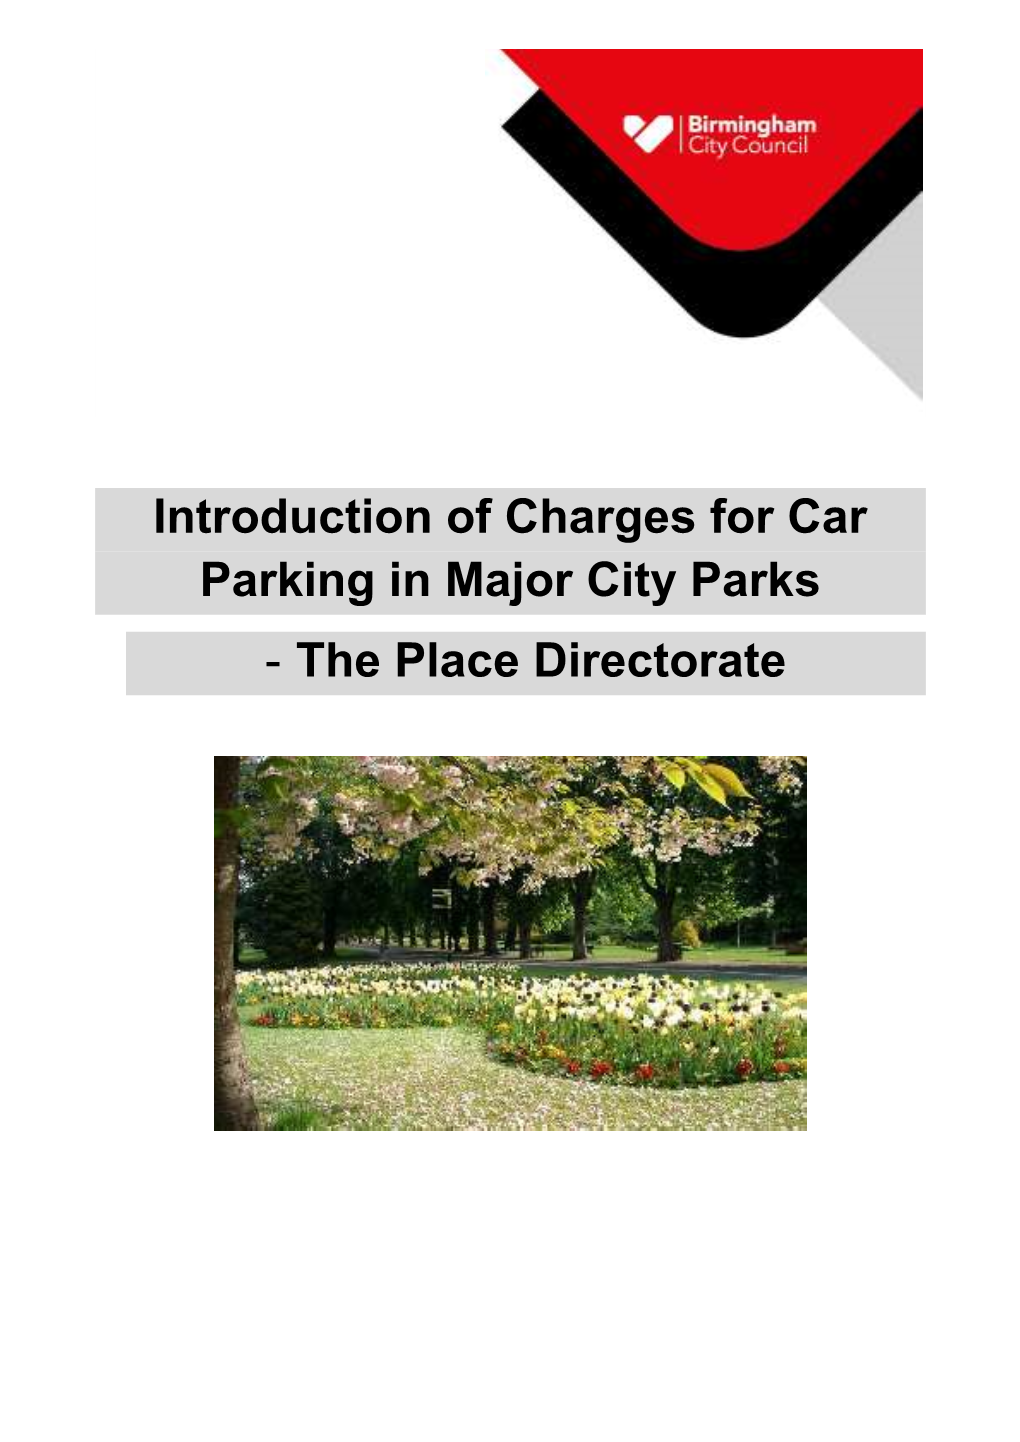 Introduction of Charges for Car Parking in Major City Parks - the Place Directorate